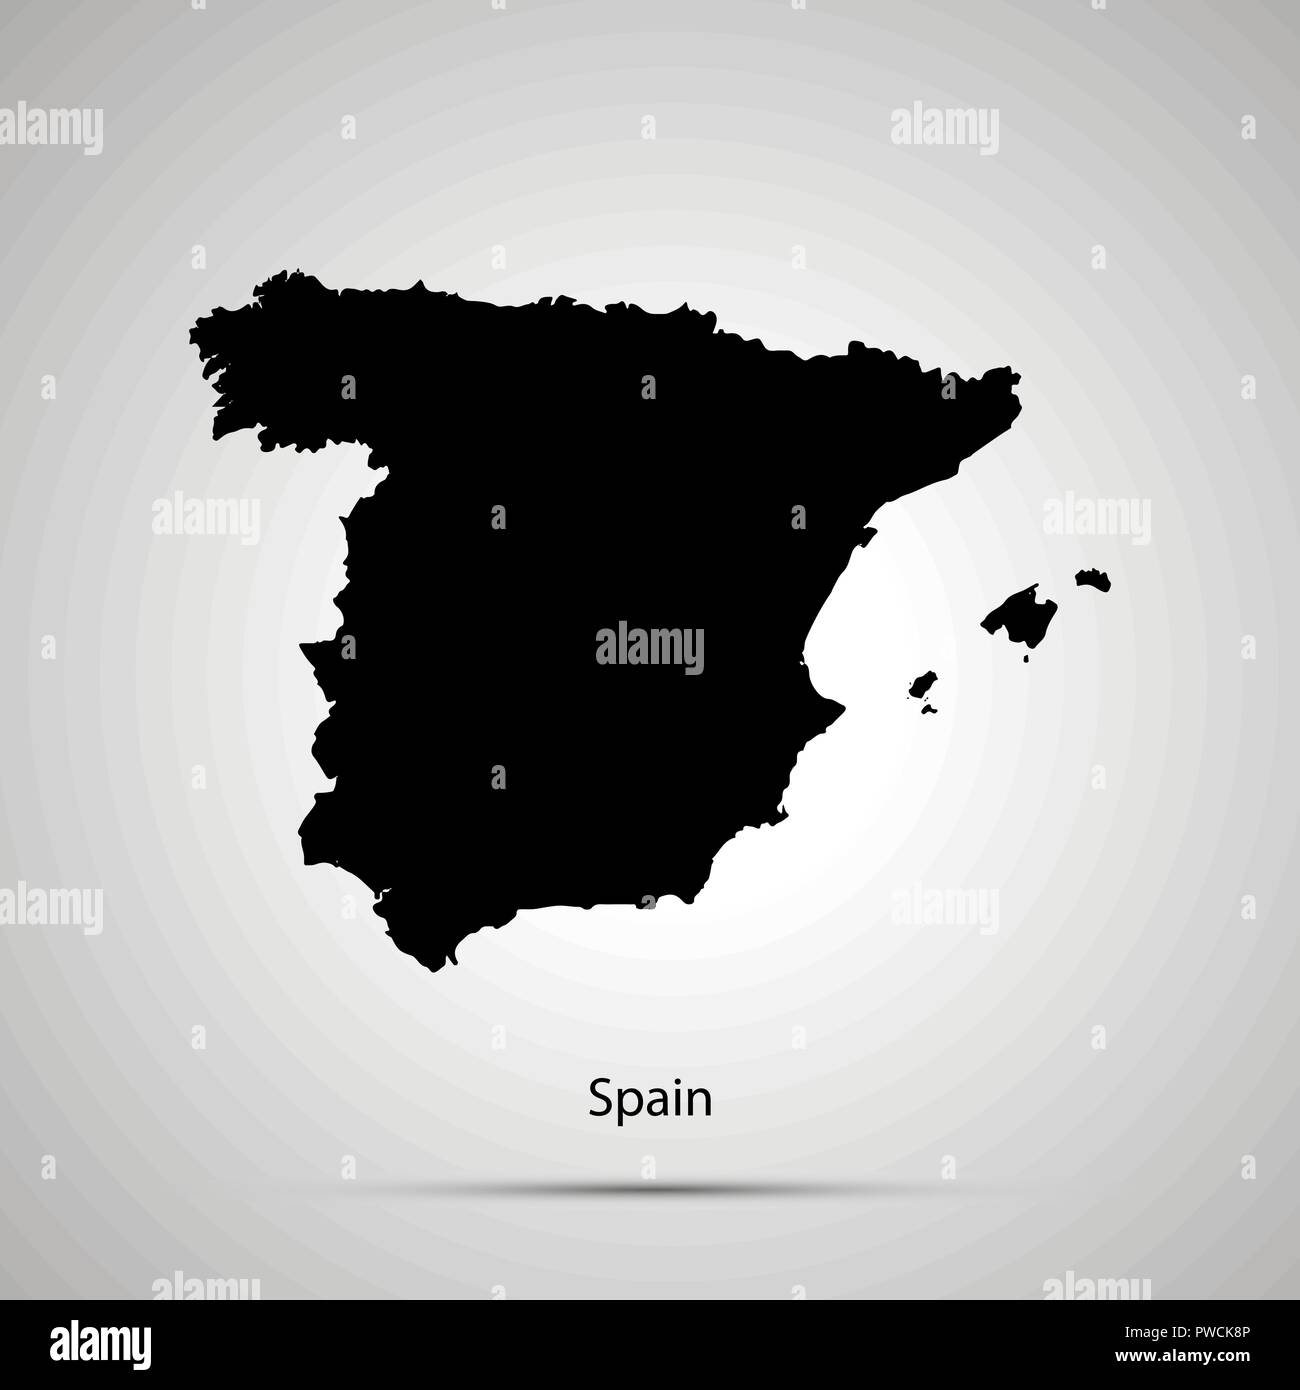 Spain country map, simple black silhouette Stock Vector